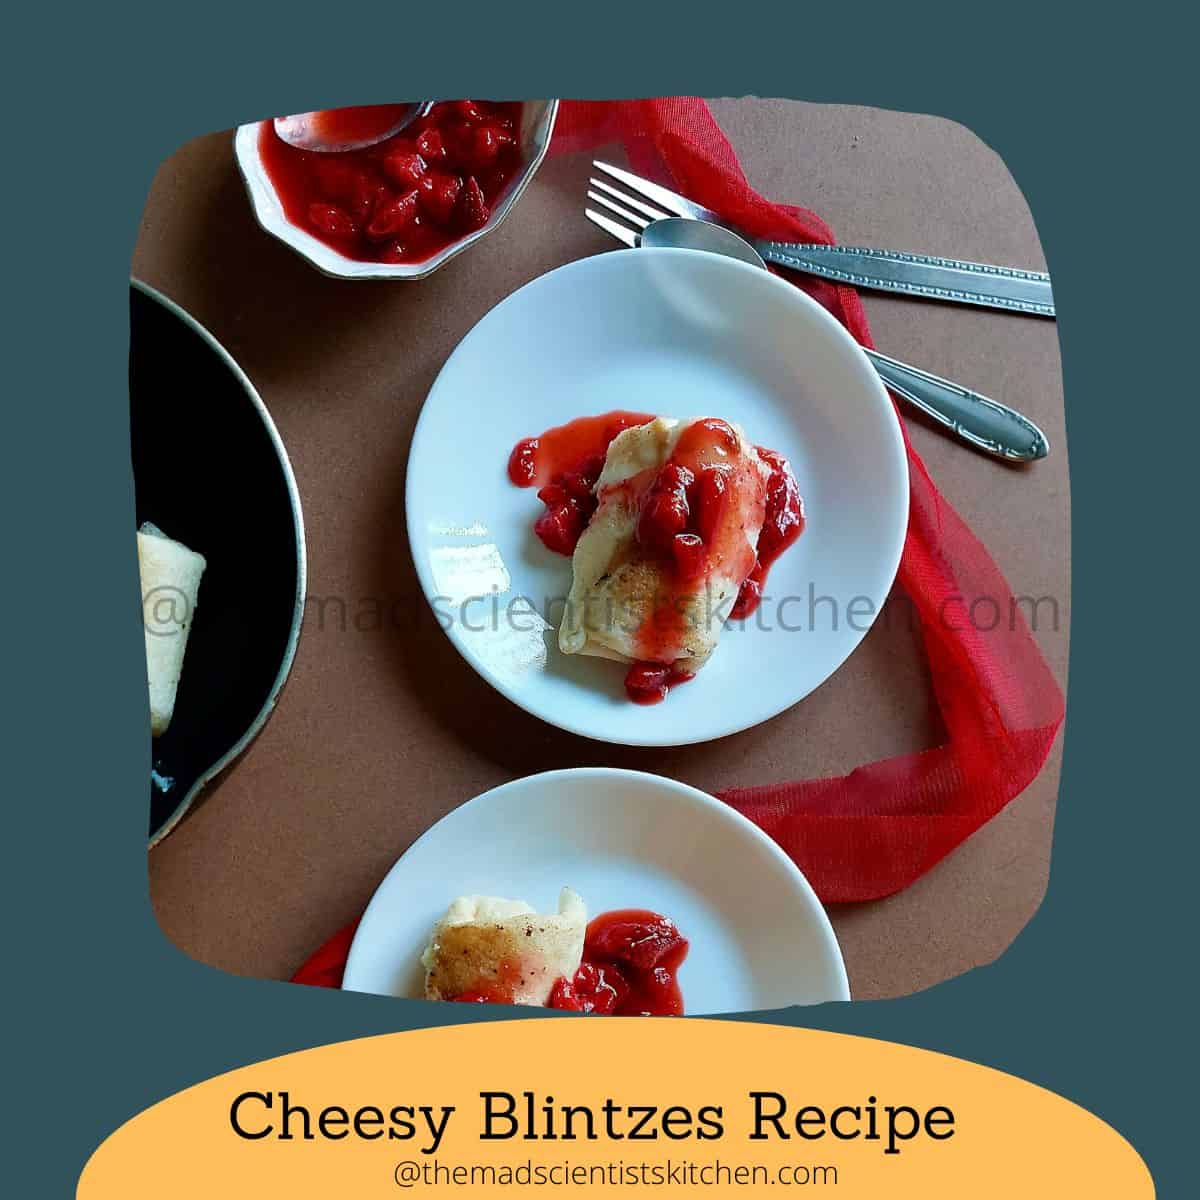 festive cheezy blintzes are delicious and